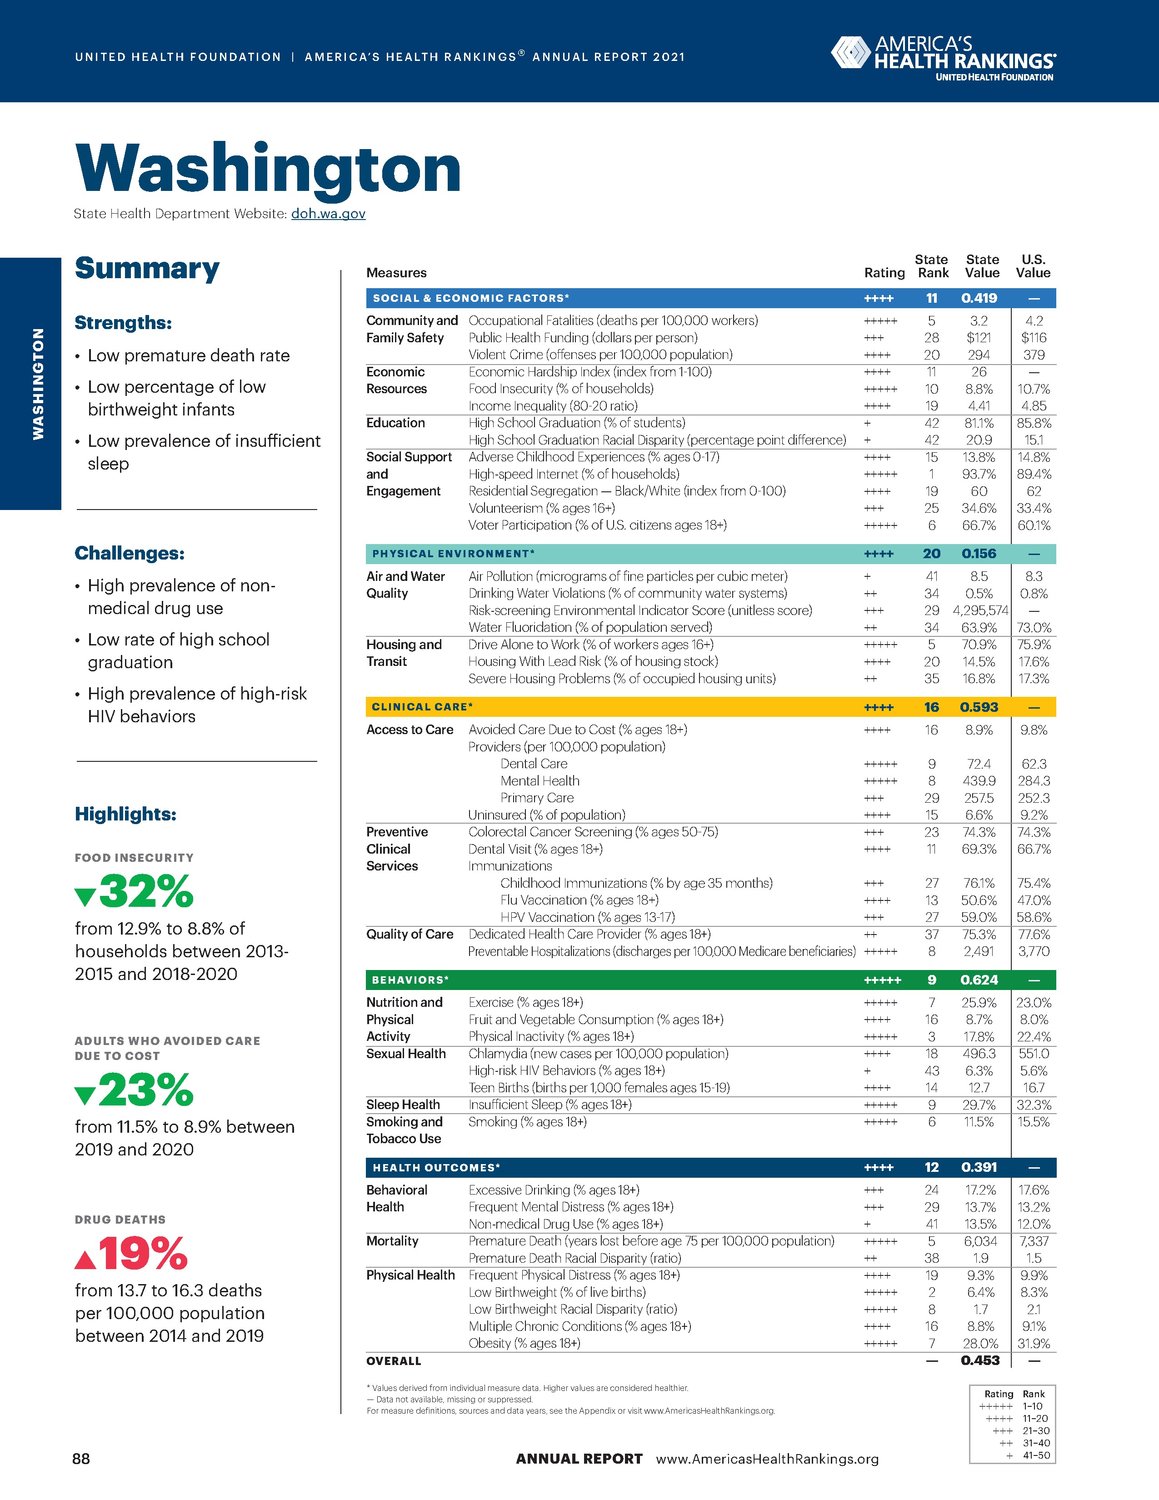 This single-page document compares Washington's health factors against national averages. It is page 90 from the 2021 report. A printable version is included with this story.